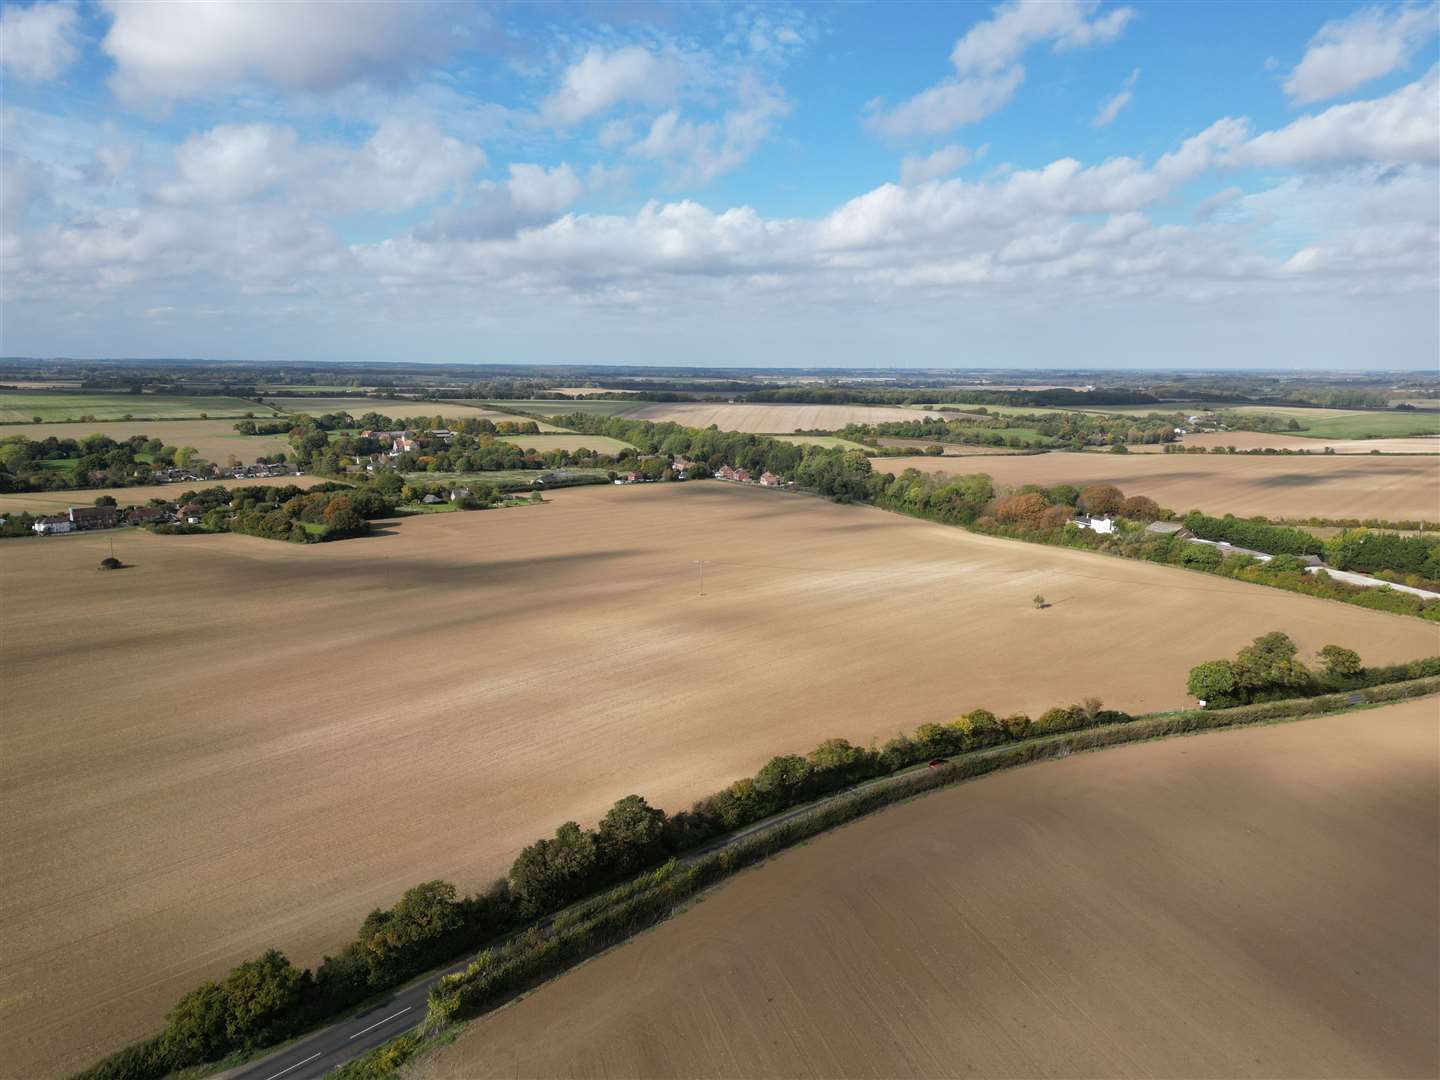 The Hawarden Trust owns about half of the huge site between Adisham and Aylesham. Picture: Barry Goodwin